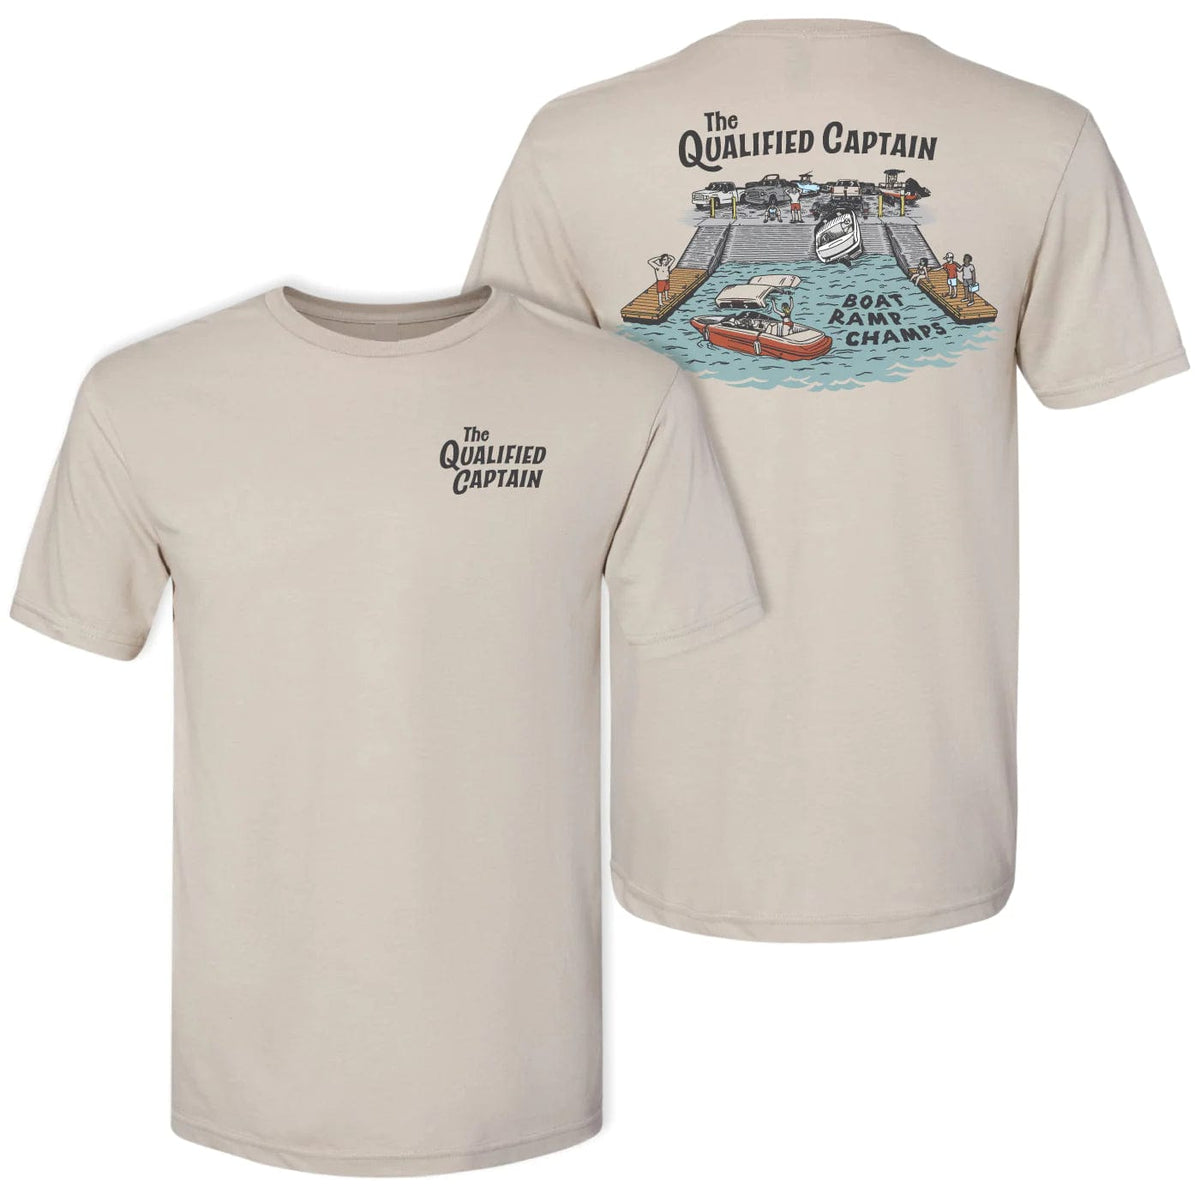 Qualified Captain Boat Ramp Champ Tee